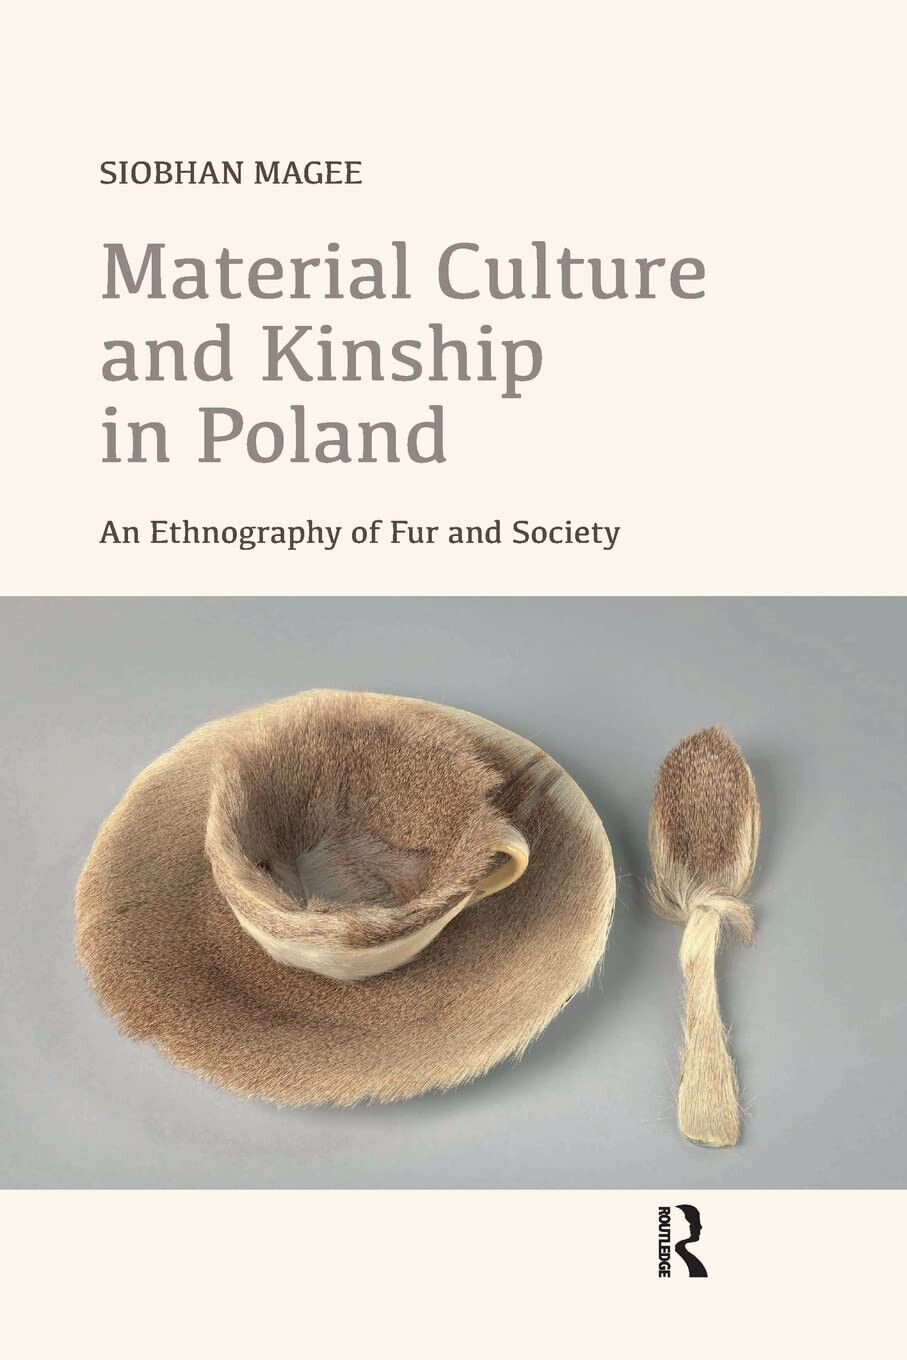 Material Culture And Kinship In Poland - Siobhan Magee - Routledge, 2021